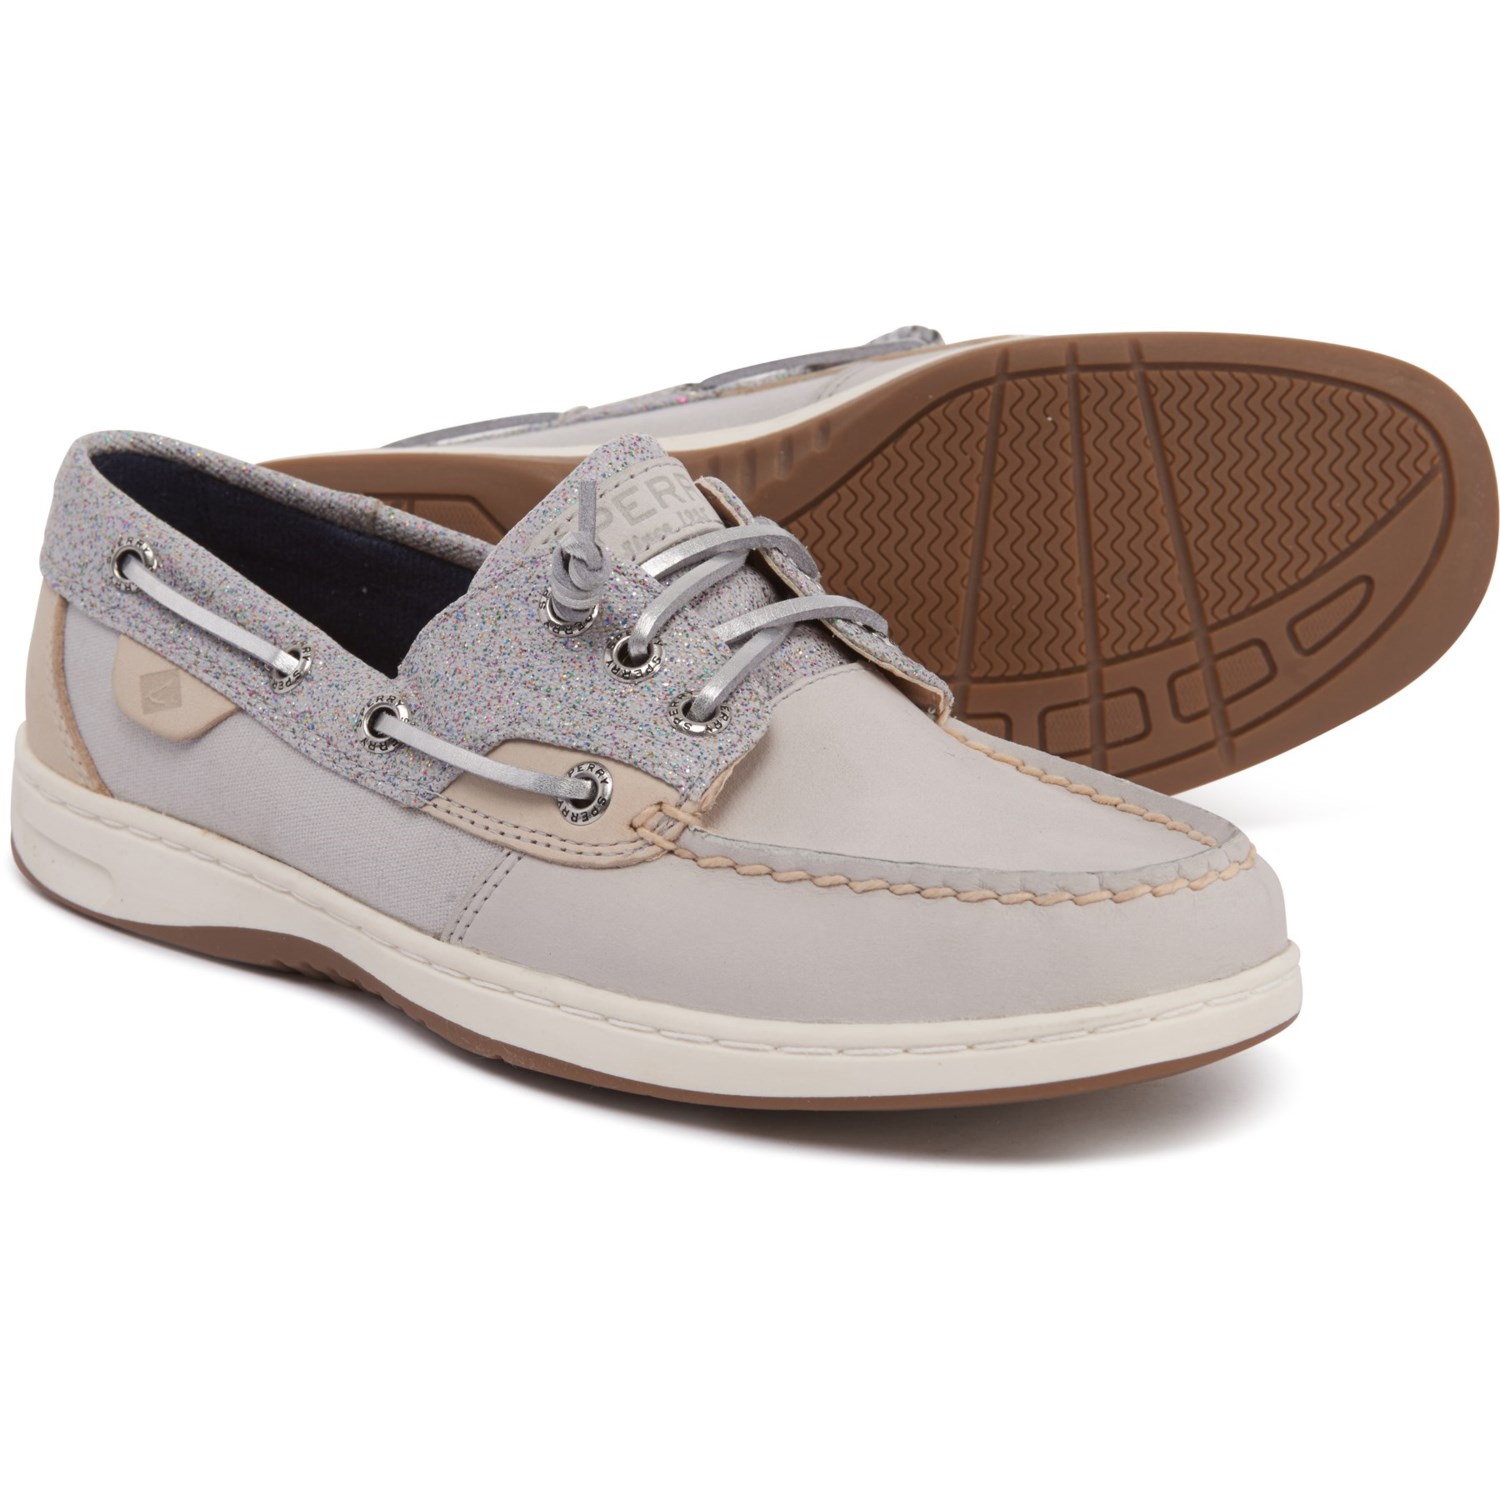 grey boat shoes